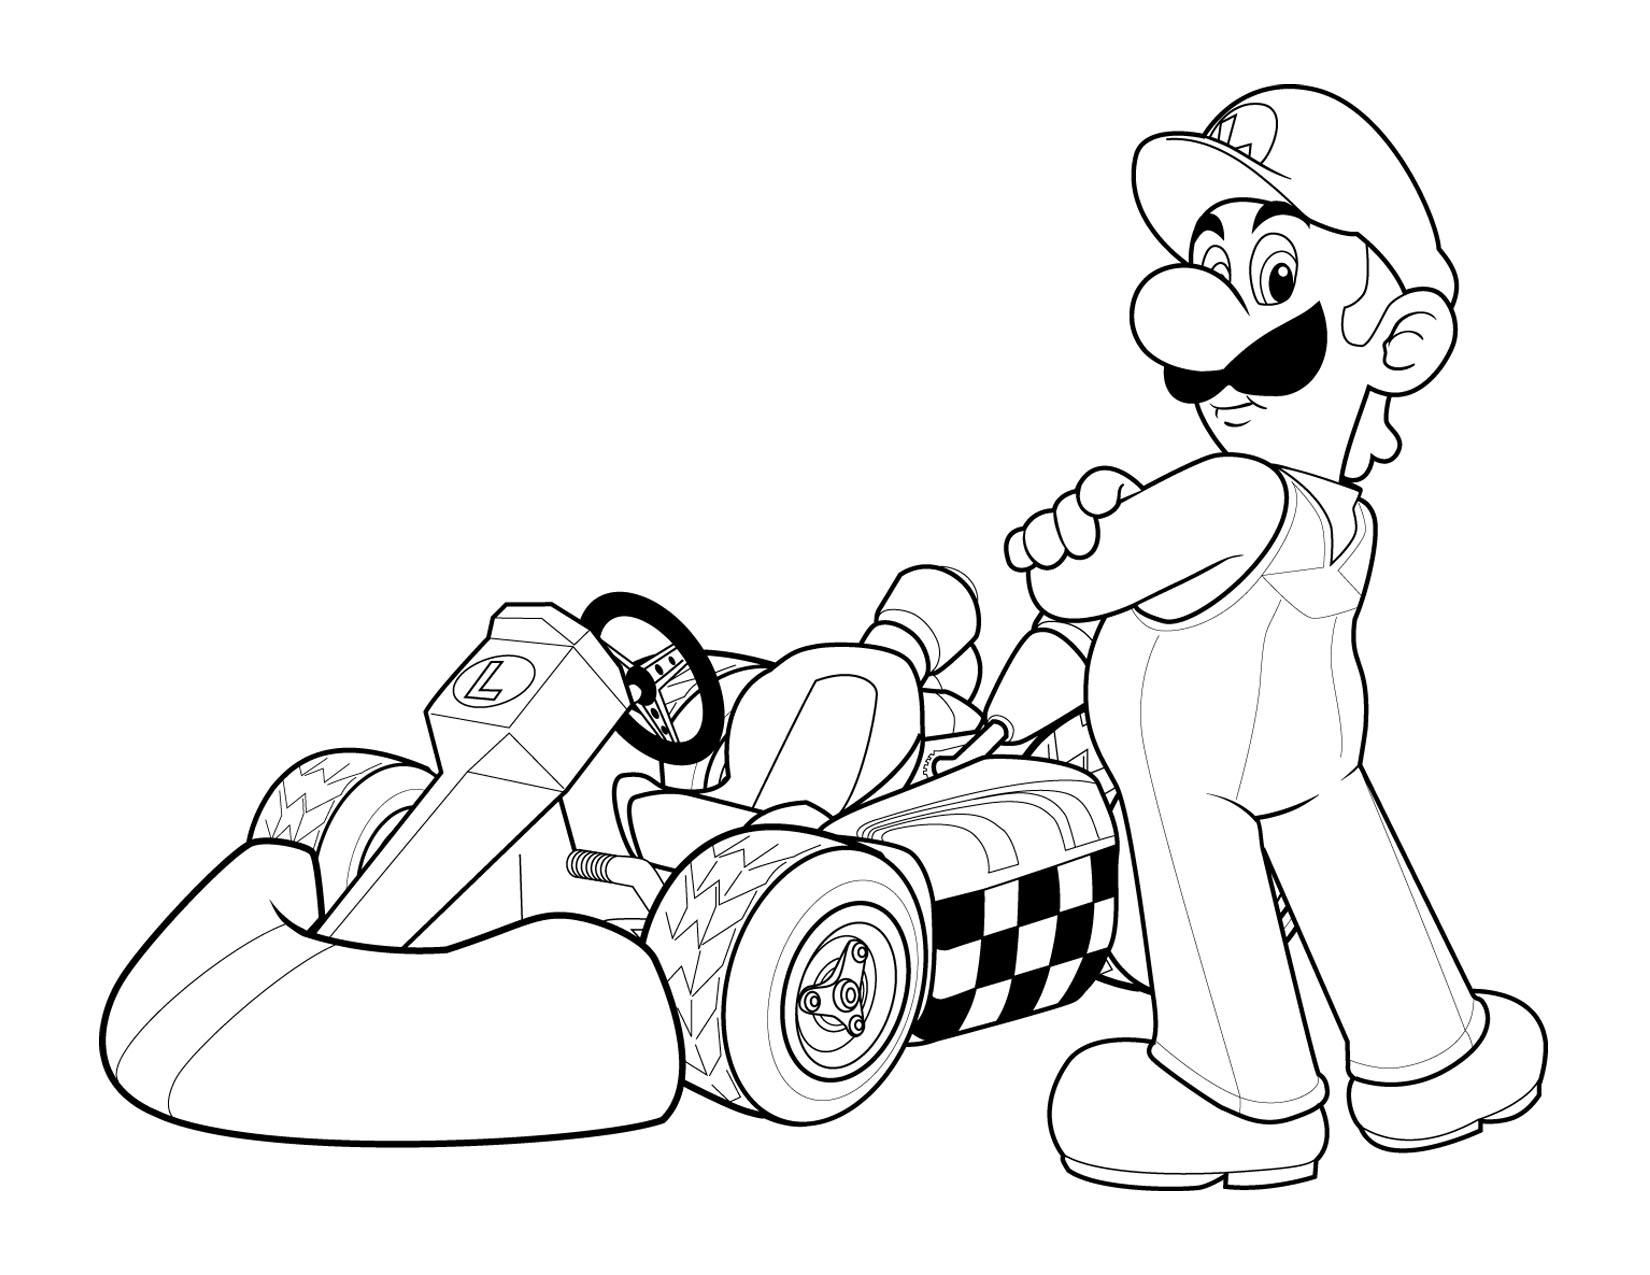 Mario Bros Coloring Pages To Print | High Quality Coloring Pages